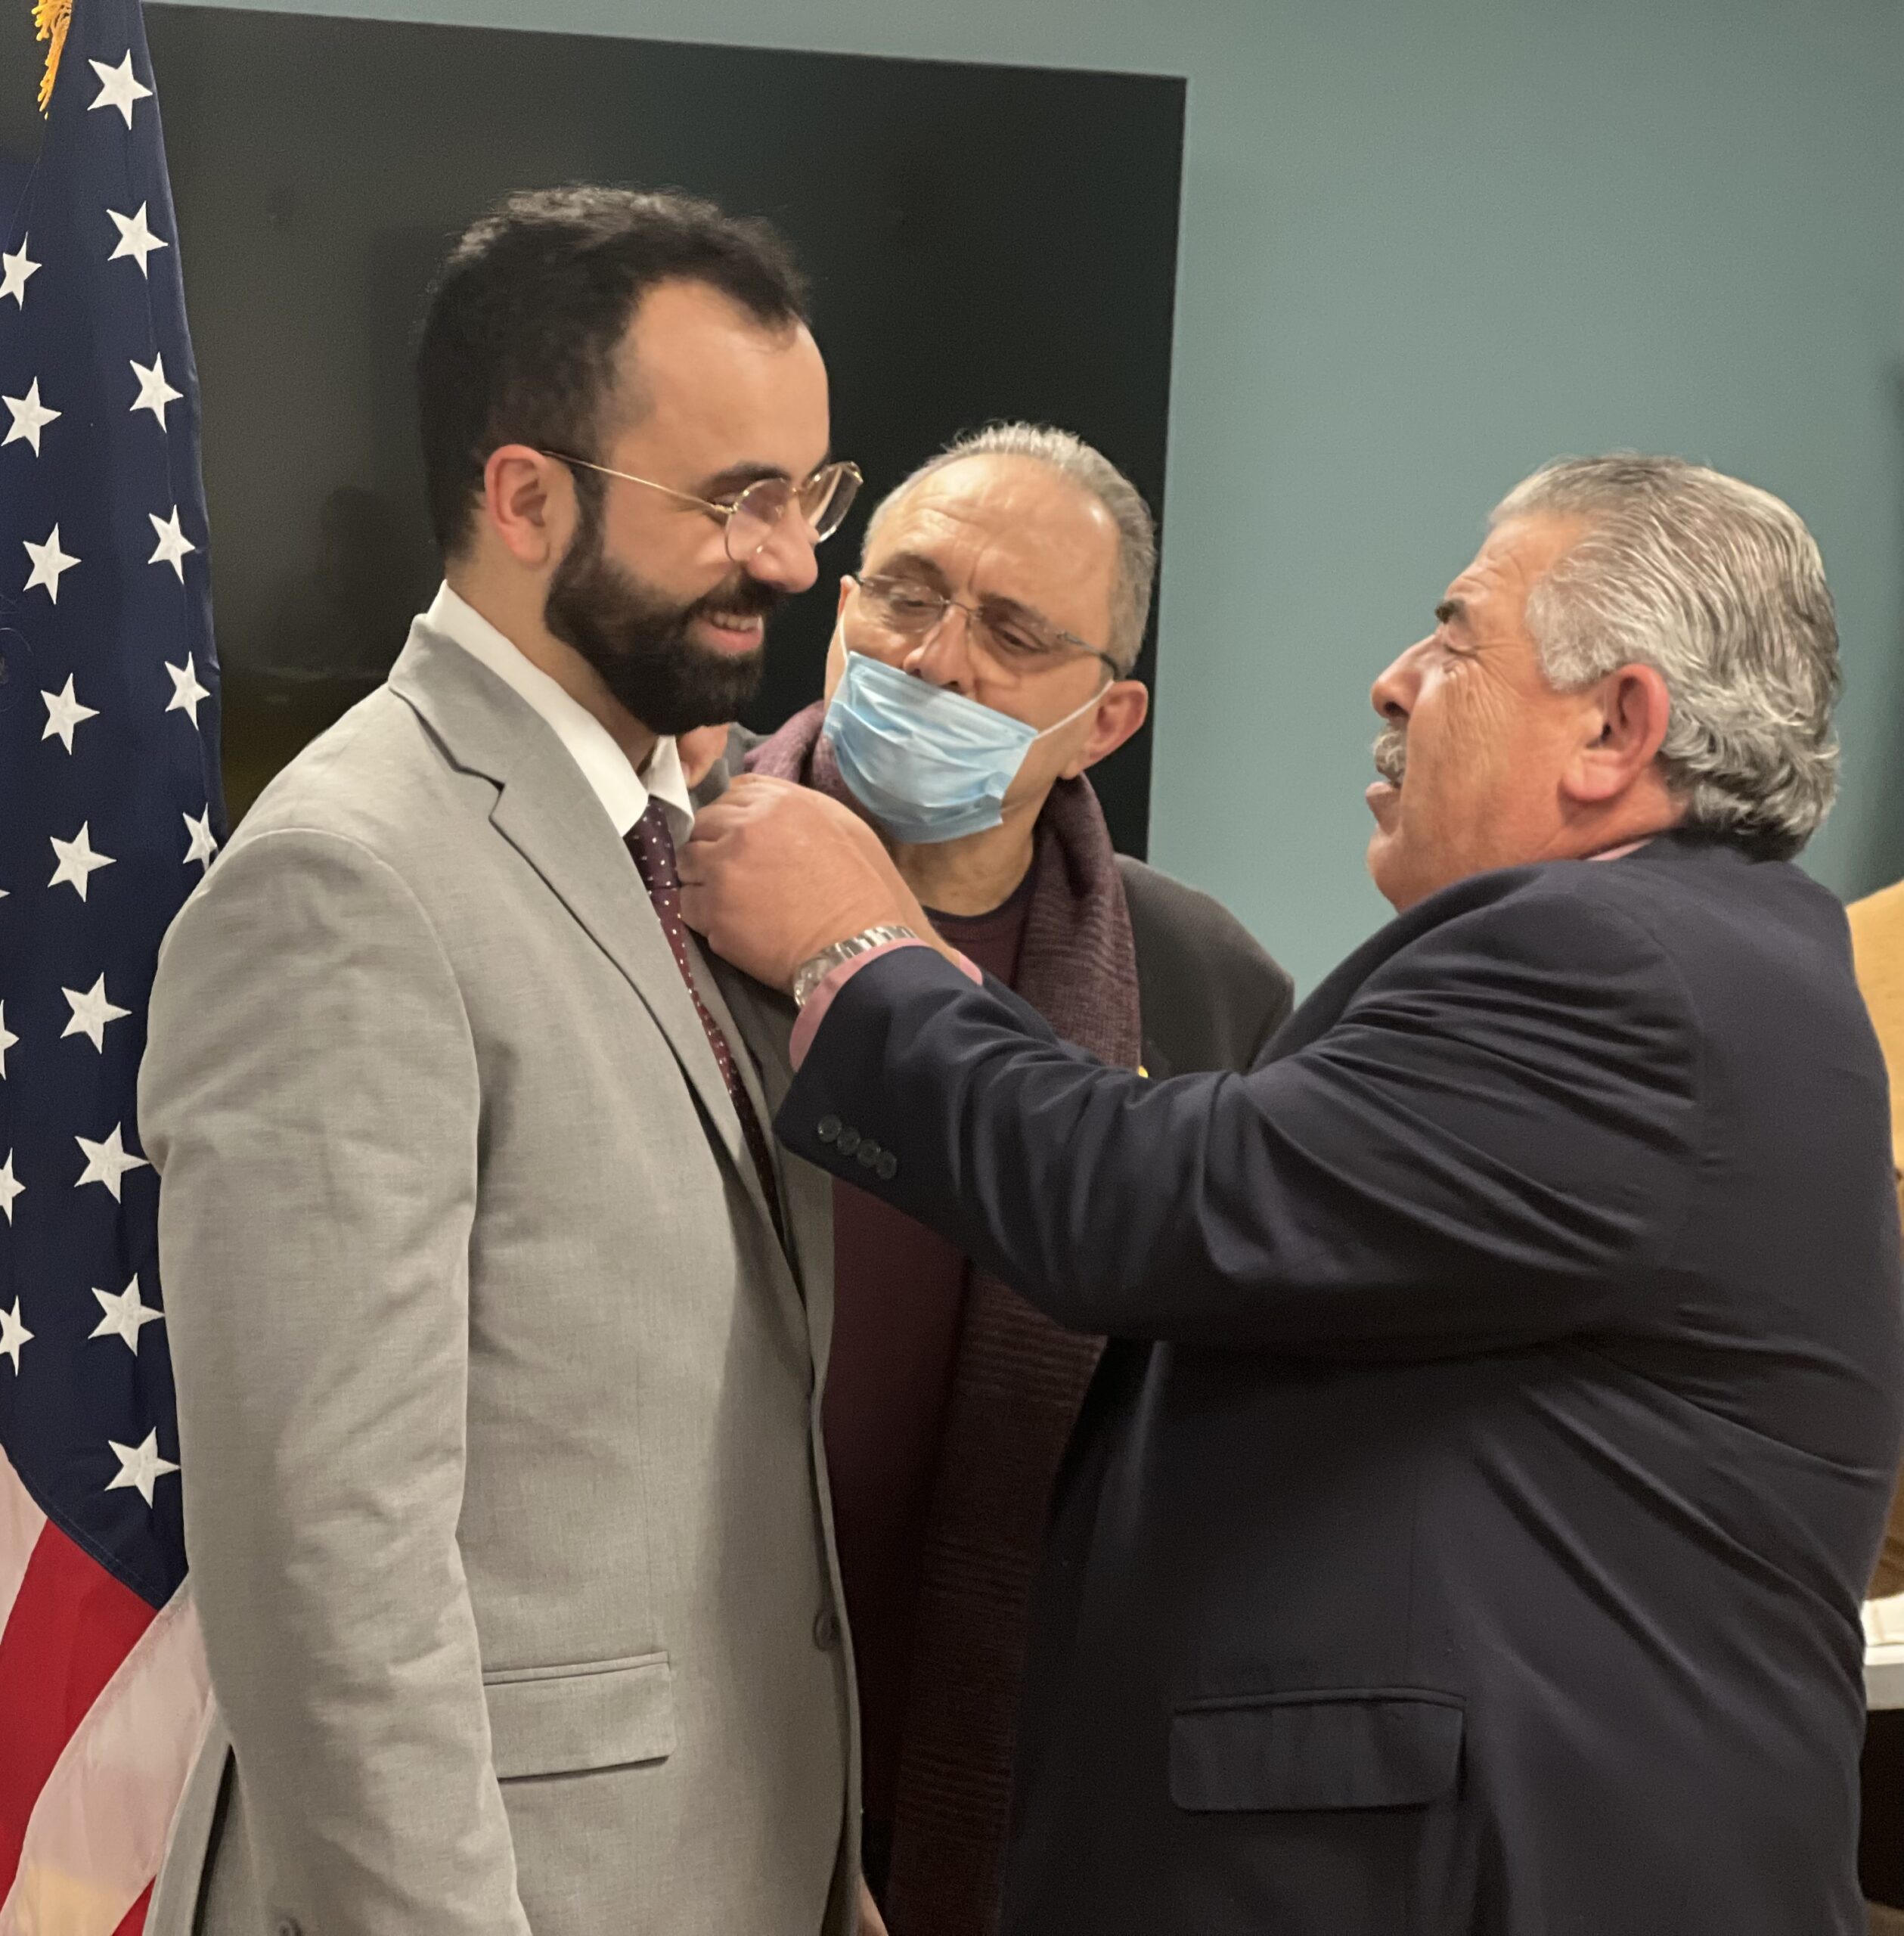 New member Randy Haddad being pinned by fellow member Ralph Succar at Salaam Club second meeting.